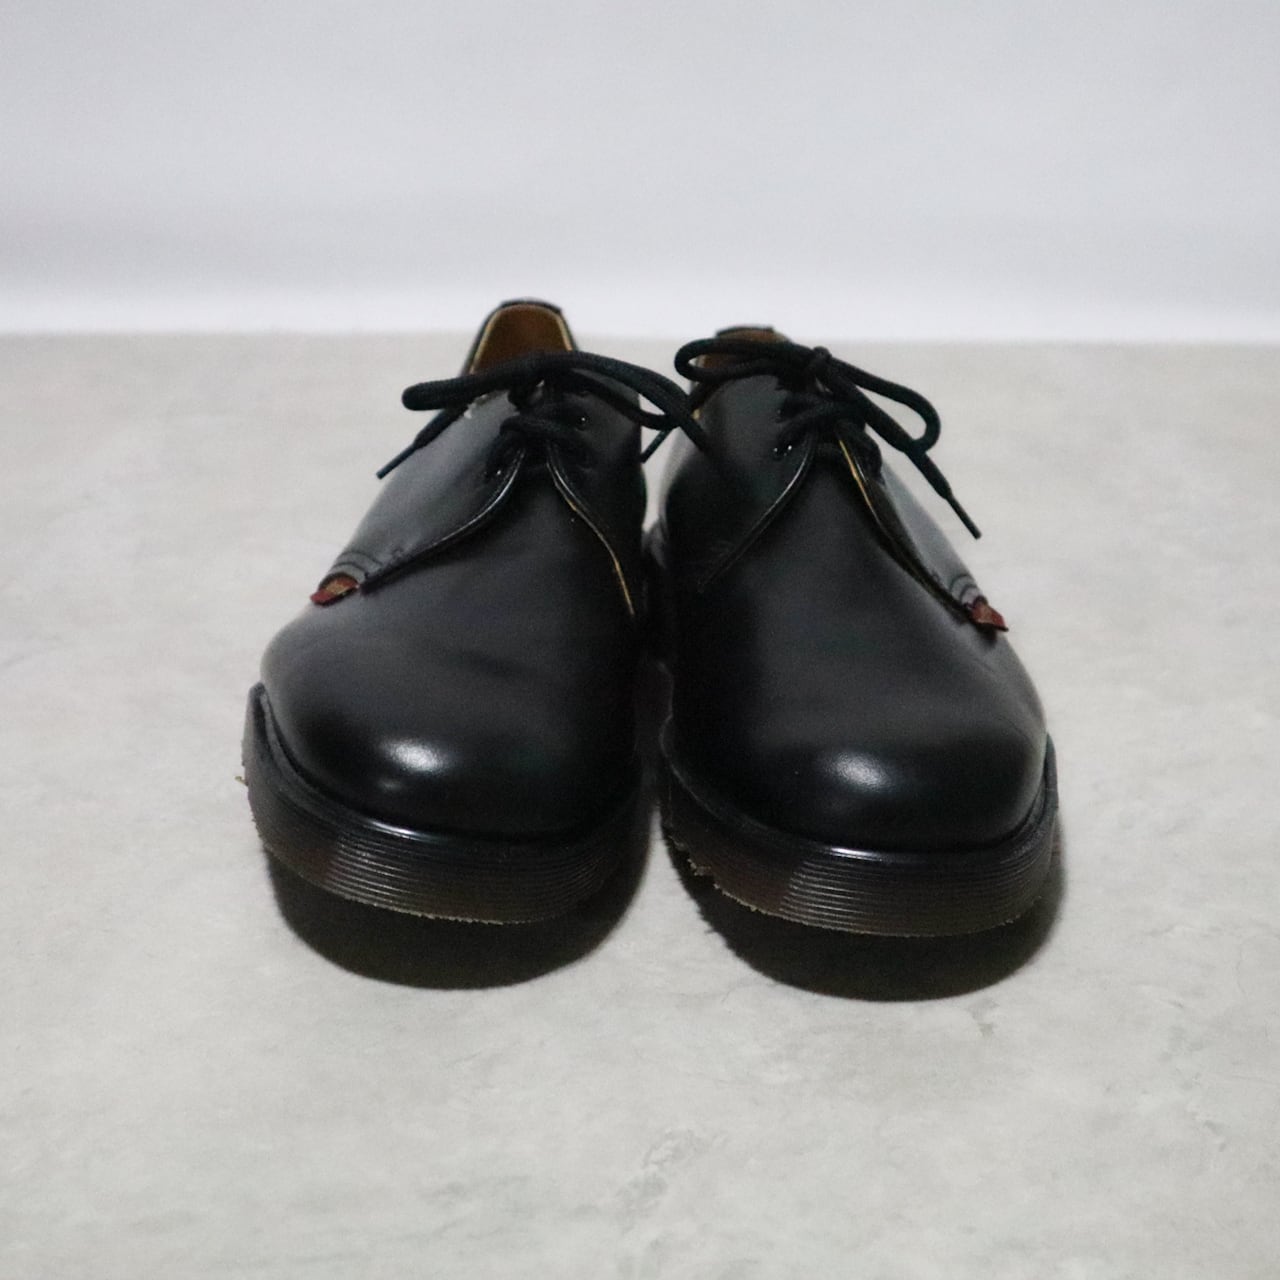 DEAD STOCK】Dr.Martens for ROYAL MAIL POSTMAN SHOES MADE IN